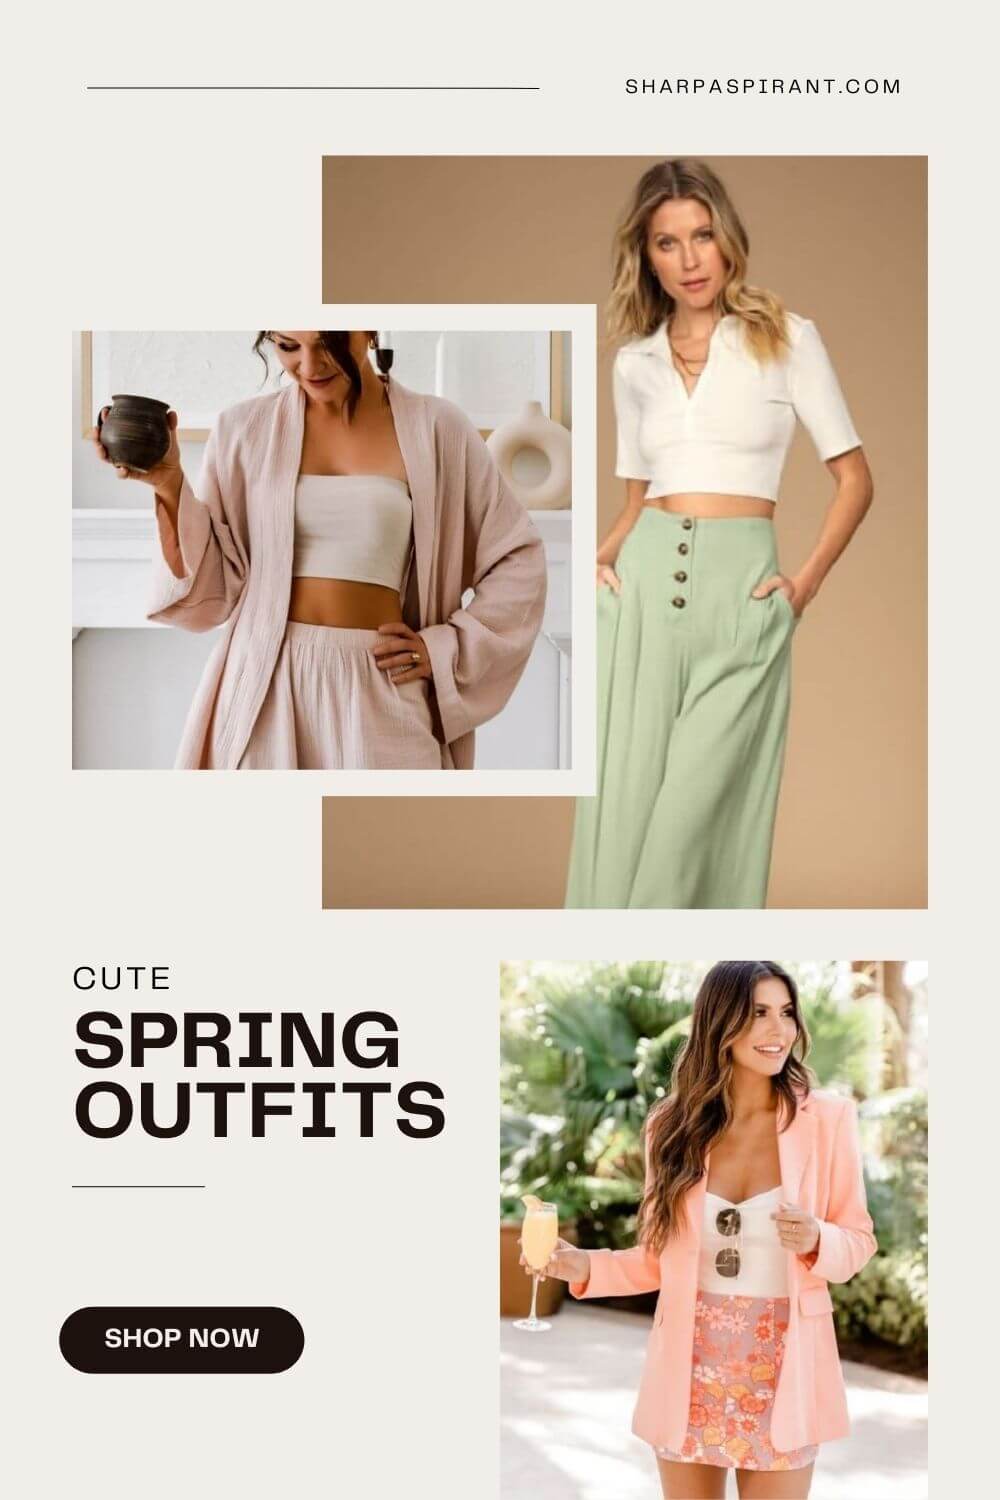 Get inspired with cute spring outfits perfect for any occasion. From jumpsuits to midi skirts, update your wardrobe with fresh ideas.